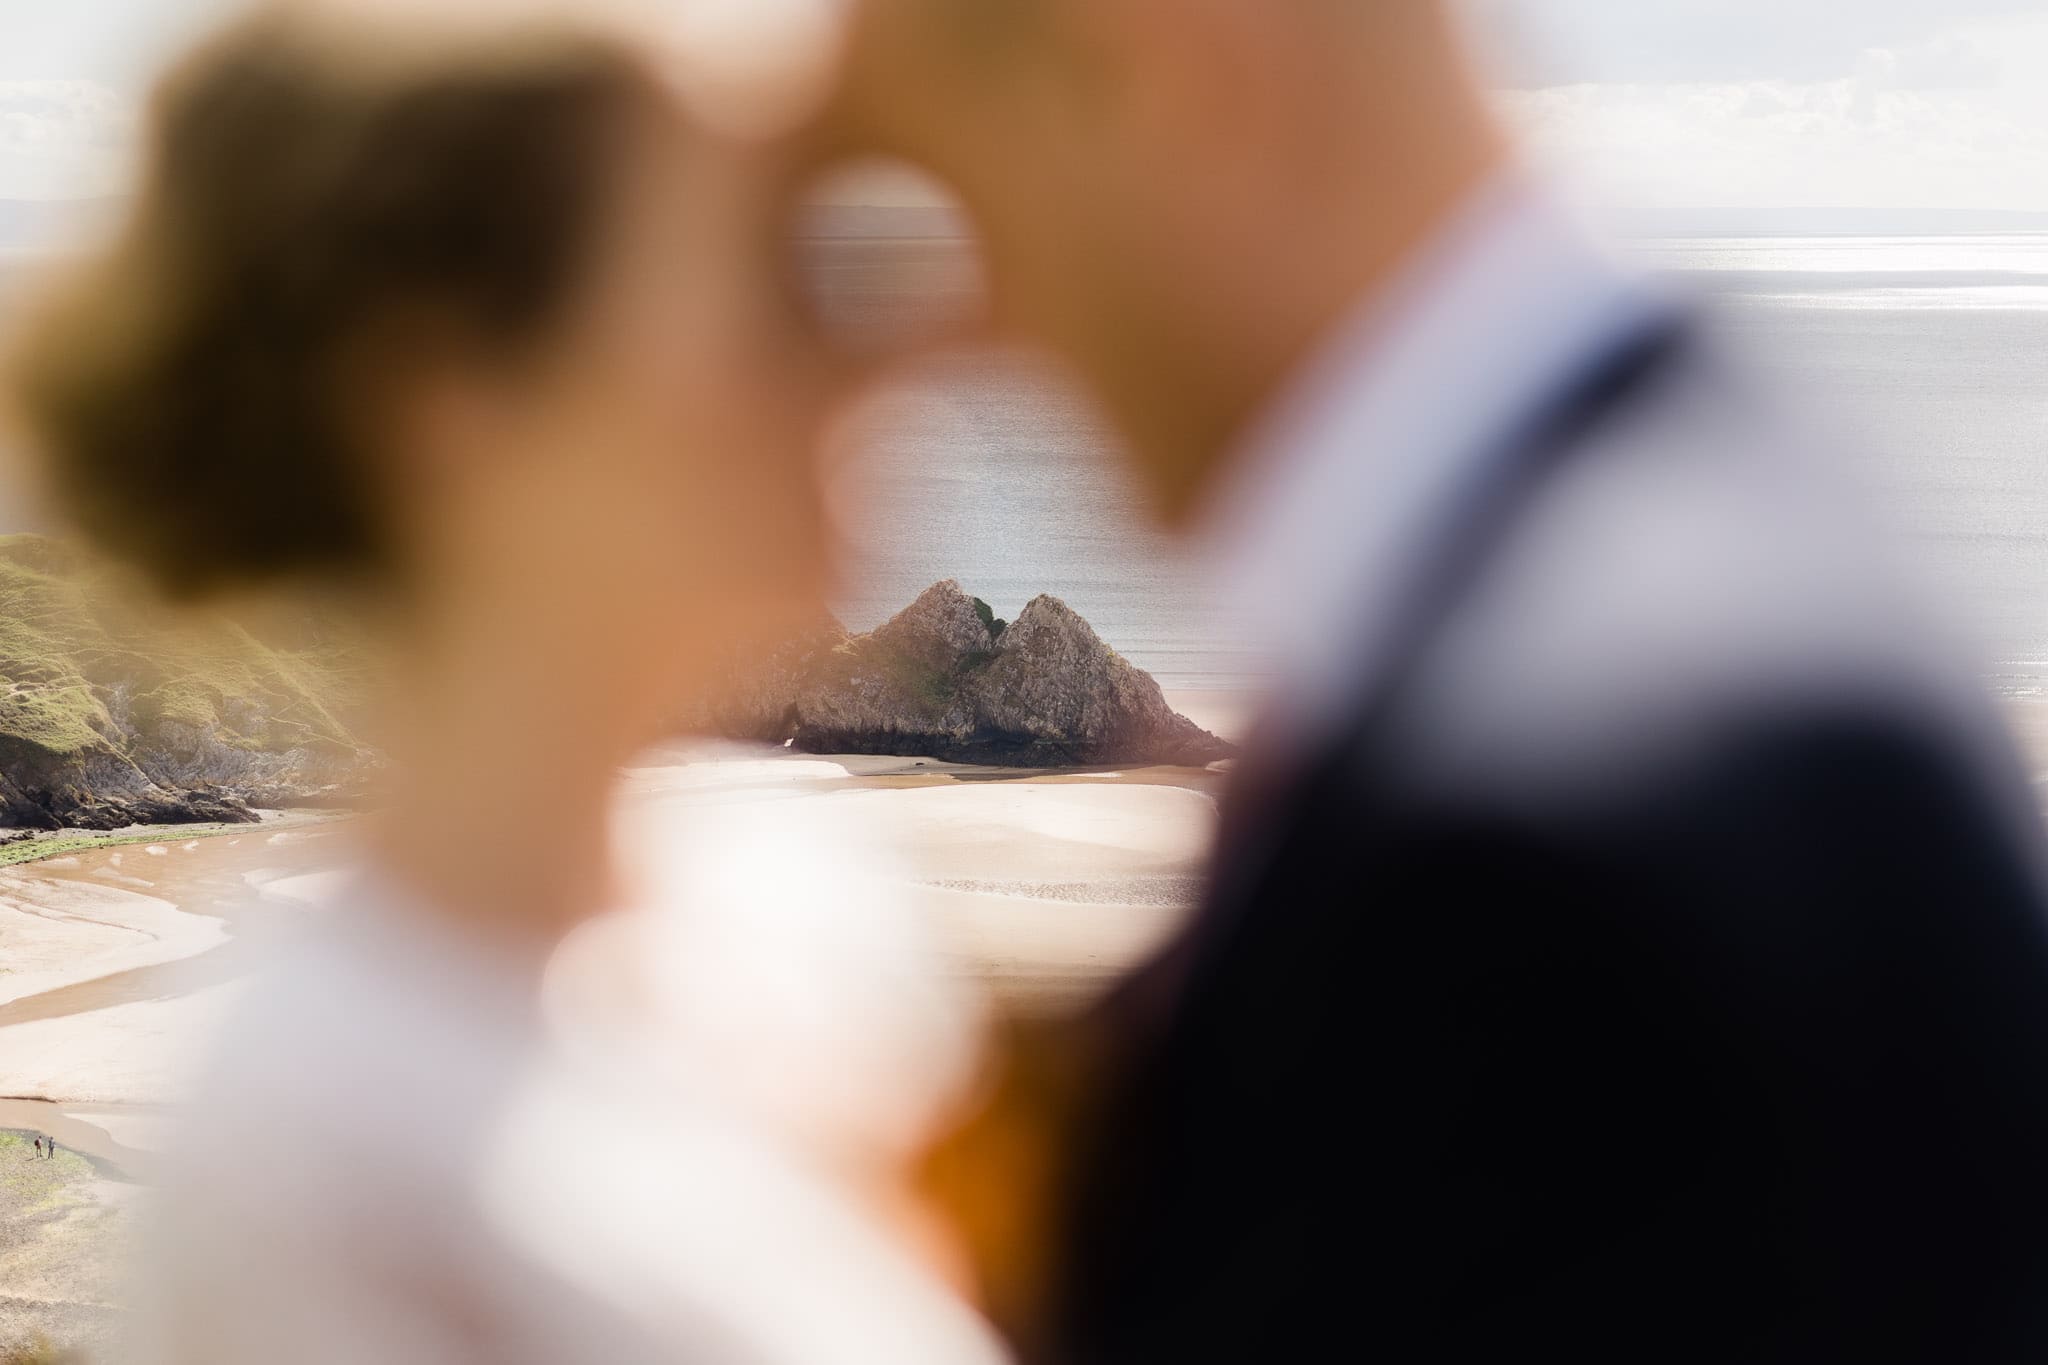 elopement photography wales three cliffs bay